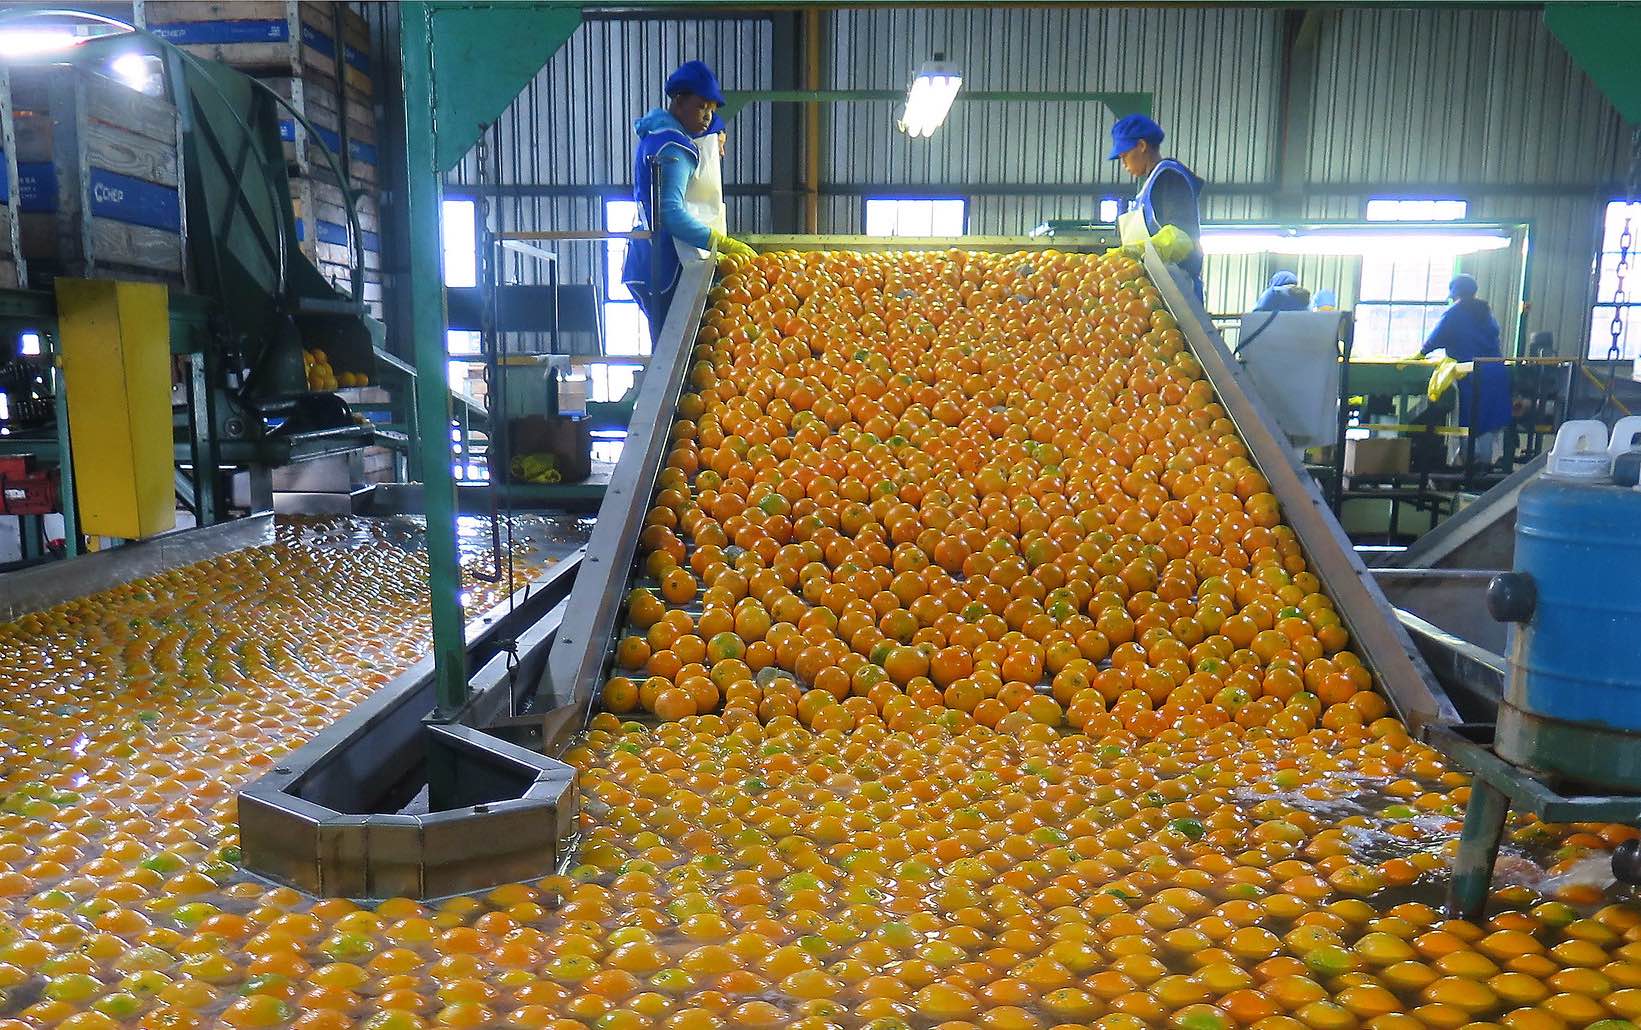 Processing oranges in South Africa